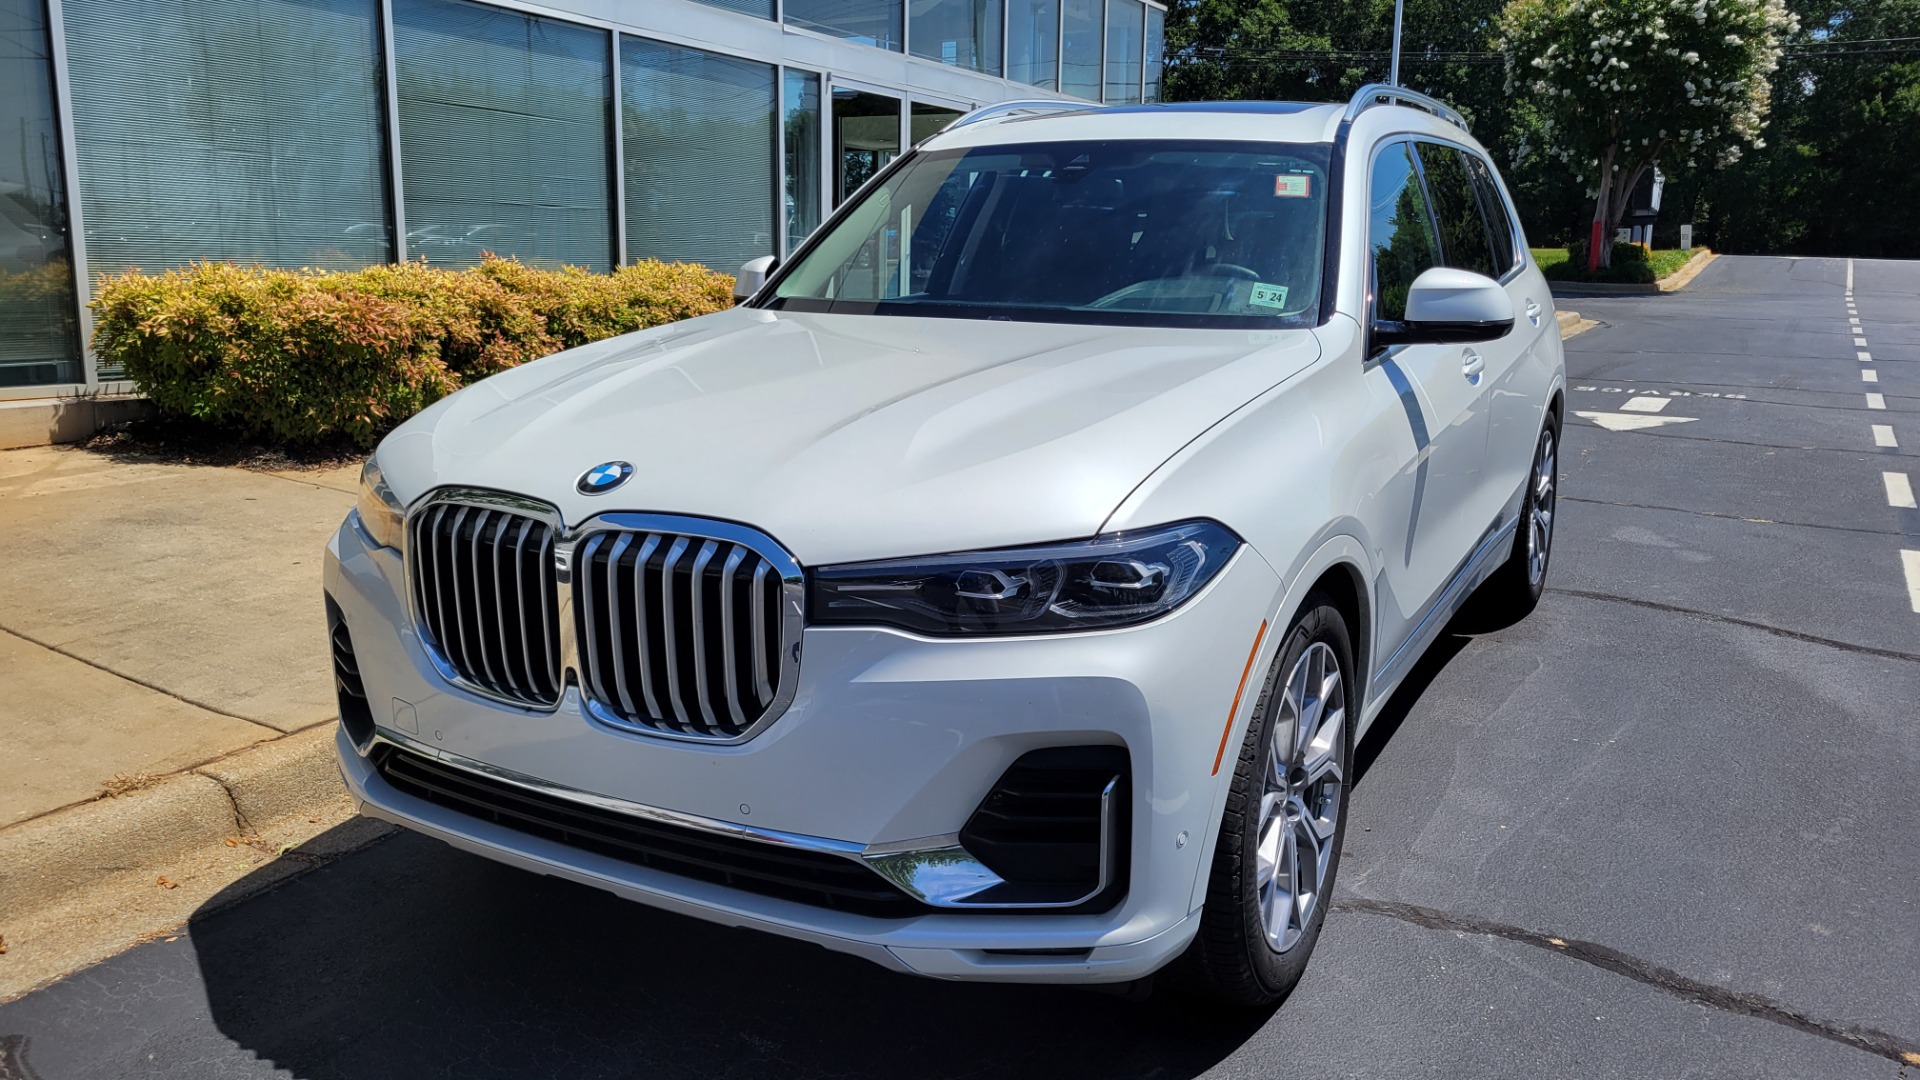 Used 2019 BMW X7 XDRIVE40I PREMIUM / NAV / HUD / PARK ASST PLUS / REMOTE START / 3D VIEW for sale $71,095 at Formula Imports in Charlotte NC 28227 2